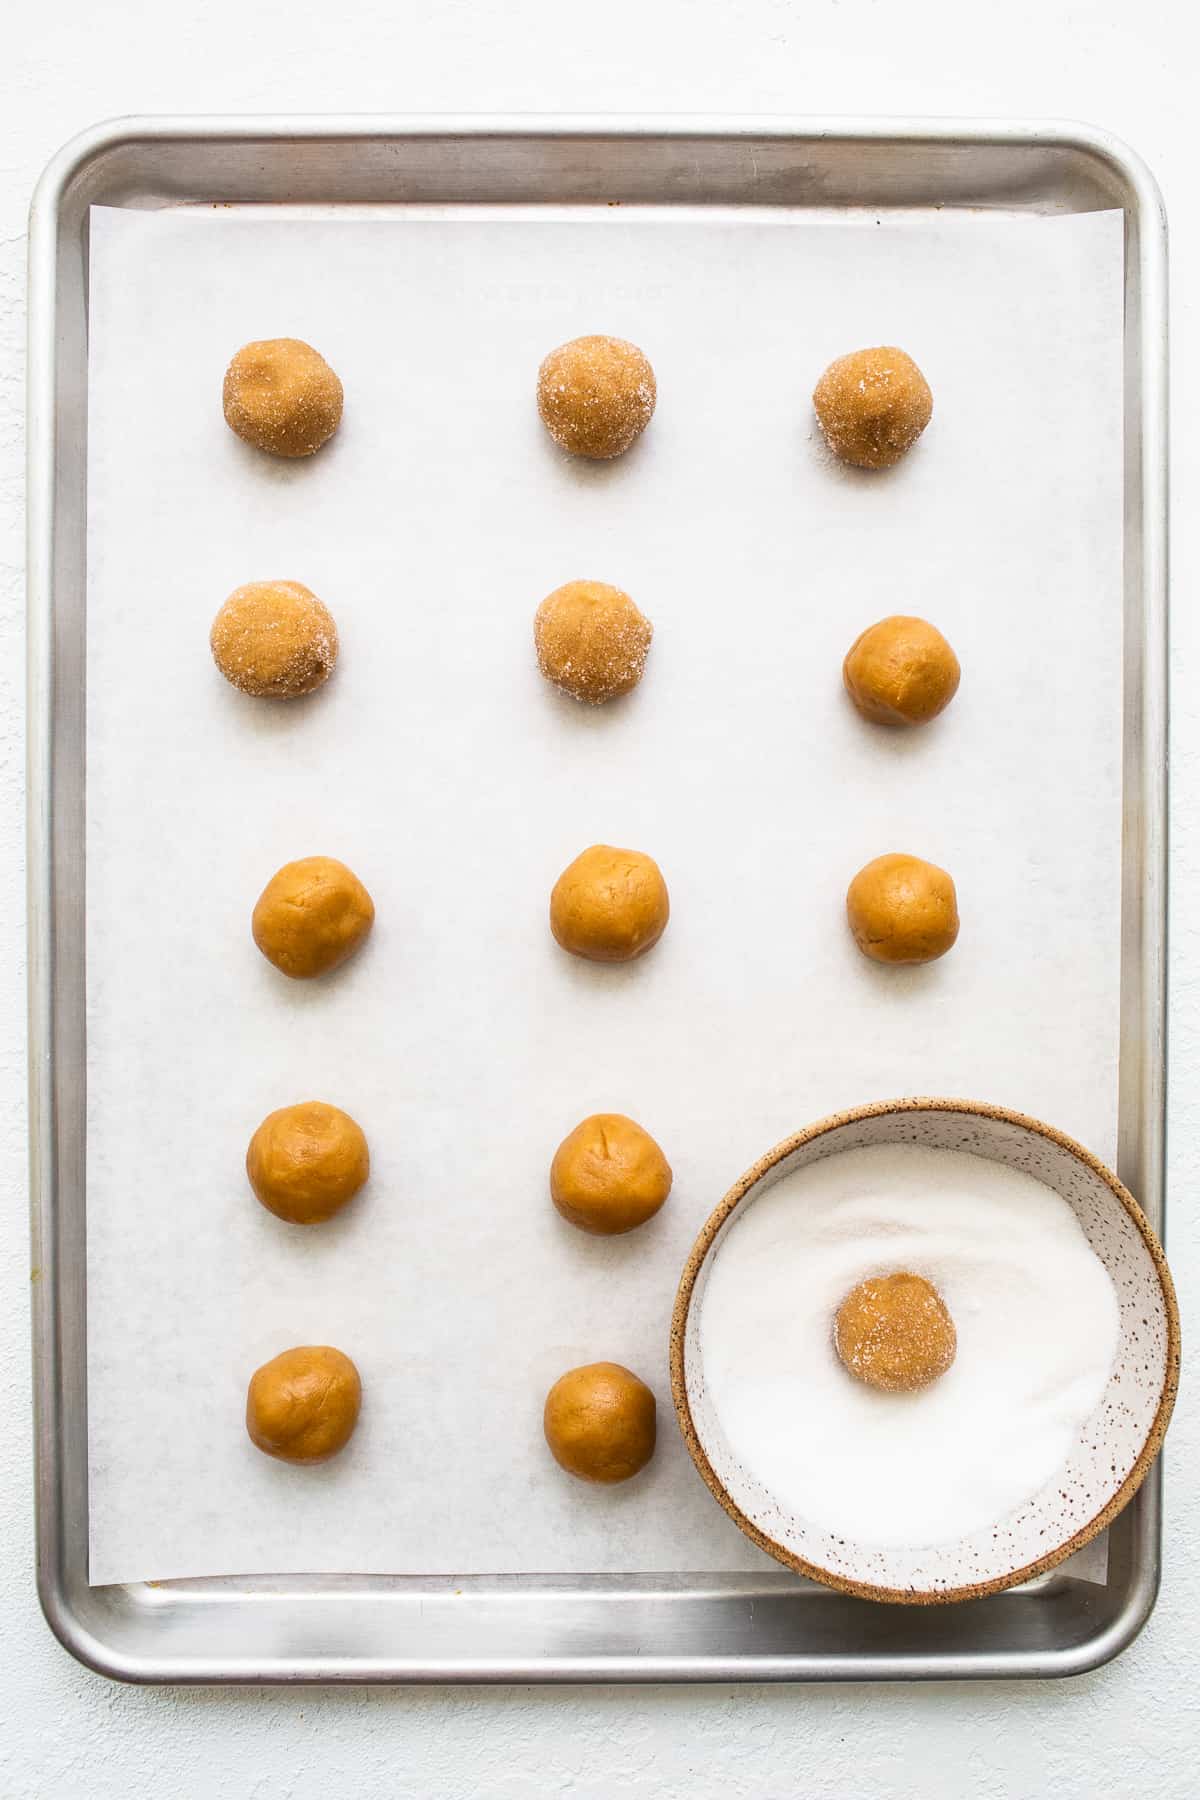 Peanut butter kiss cookie dough on a baking sheet rolled in sugar.